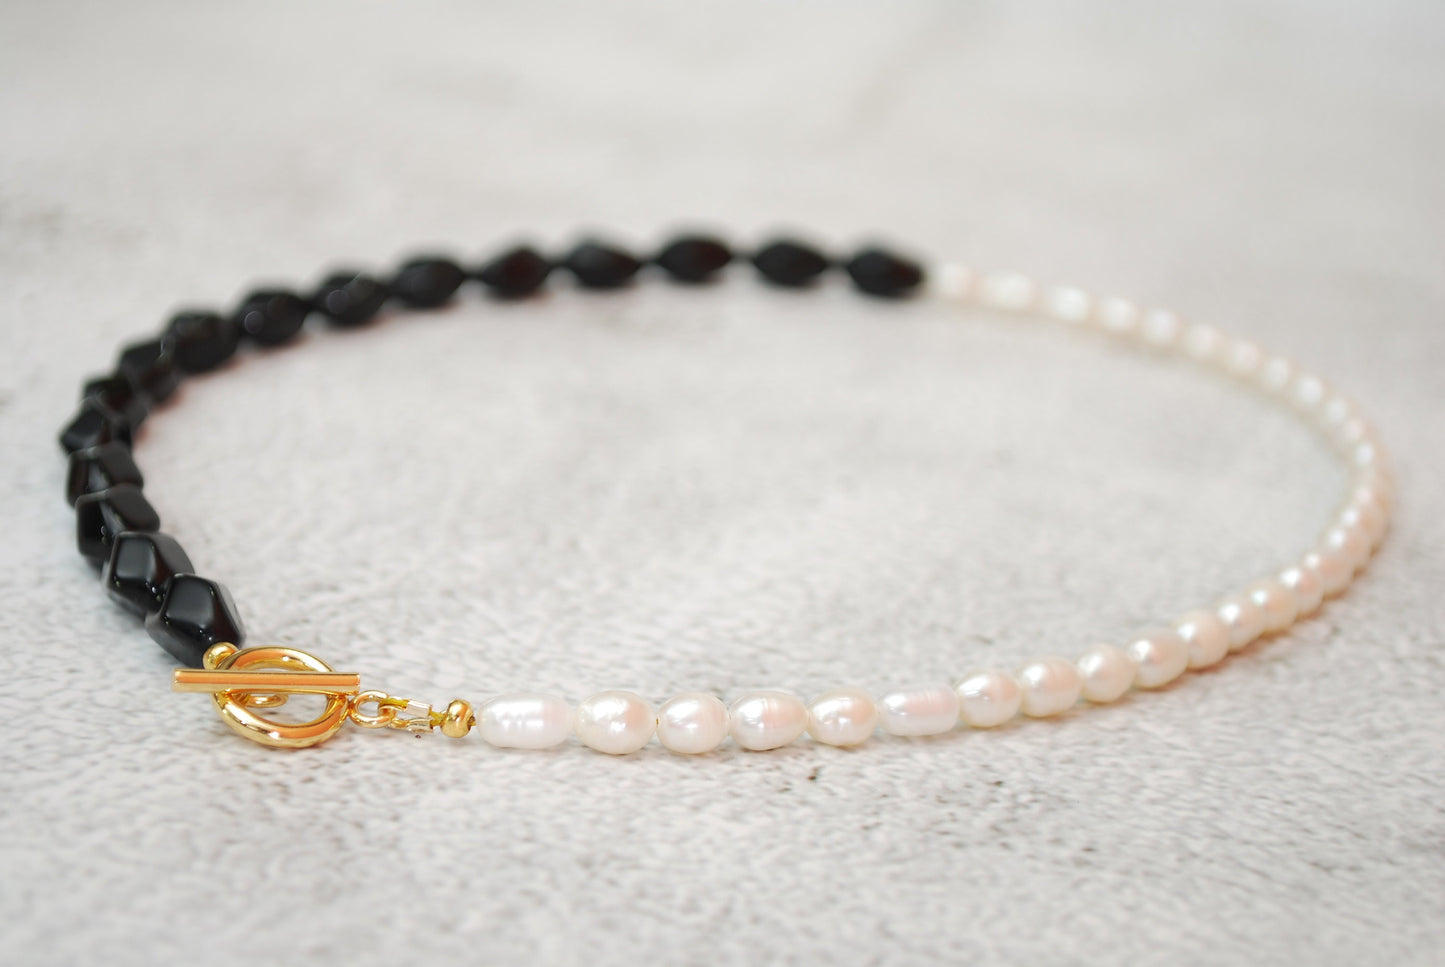 Back and white necklace, half freshwater pearl & half black glass beads choker necklace, classic style 42cm 17"